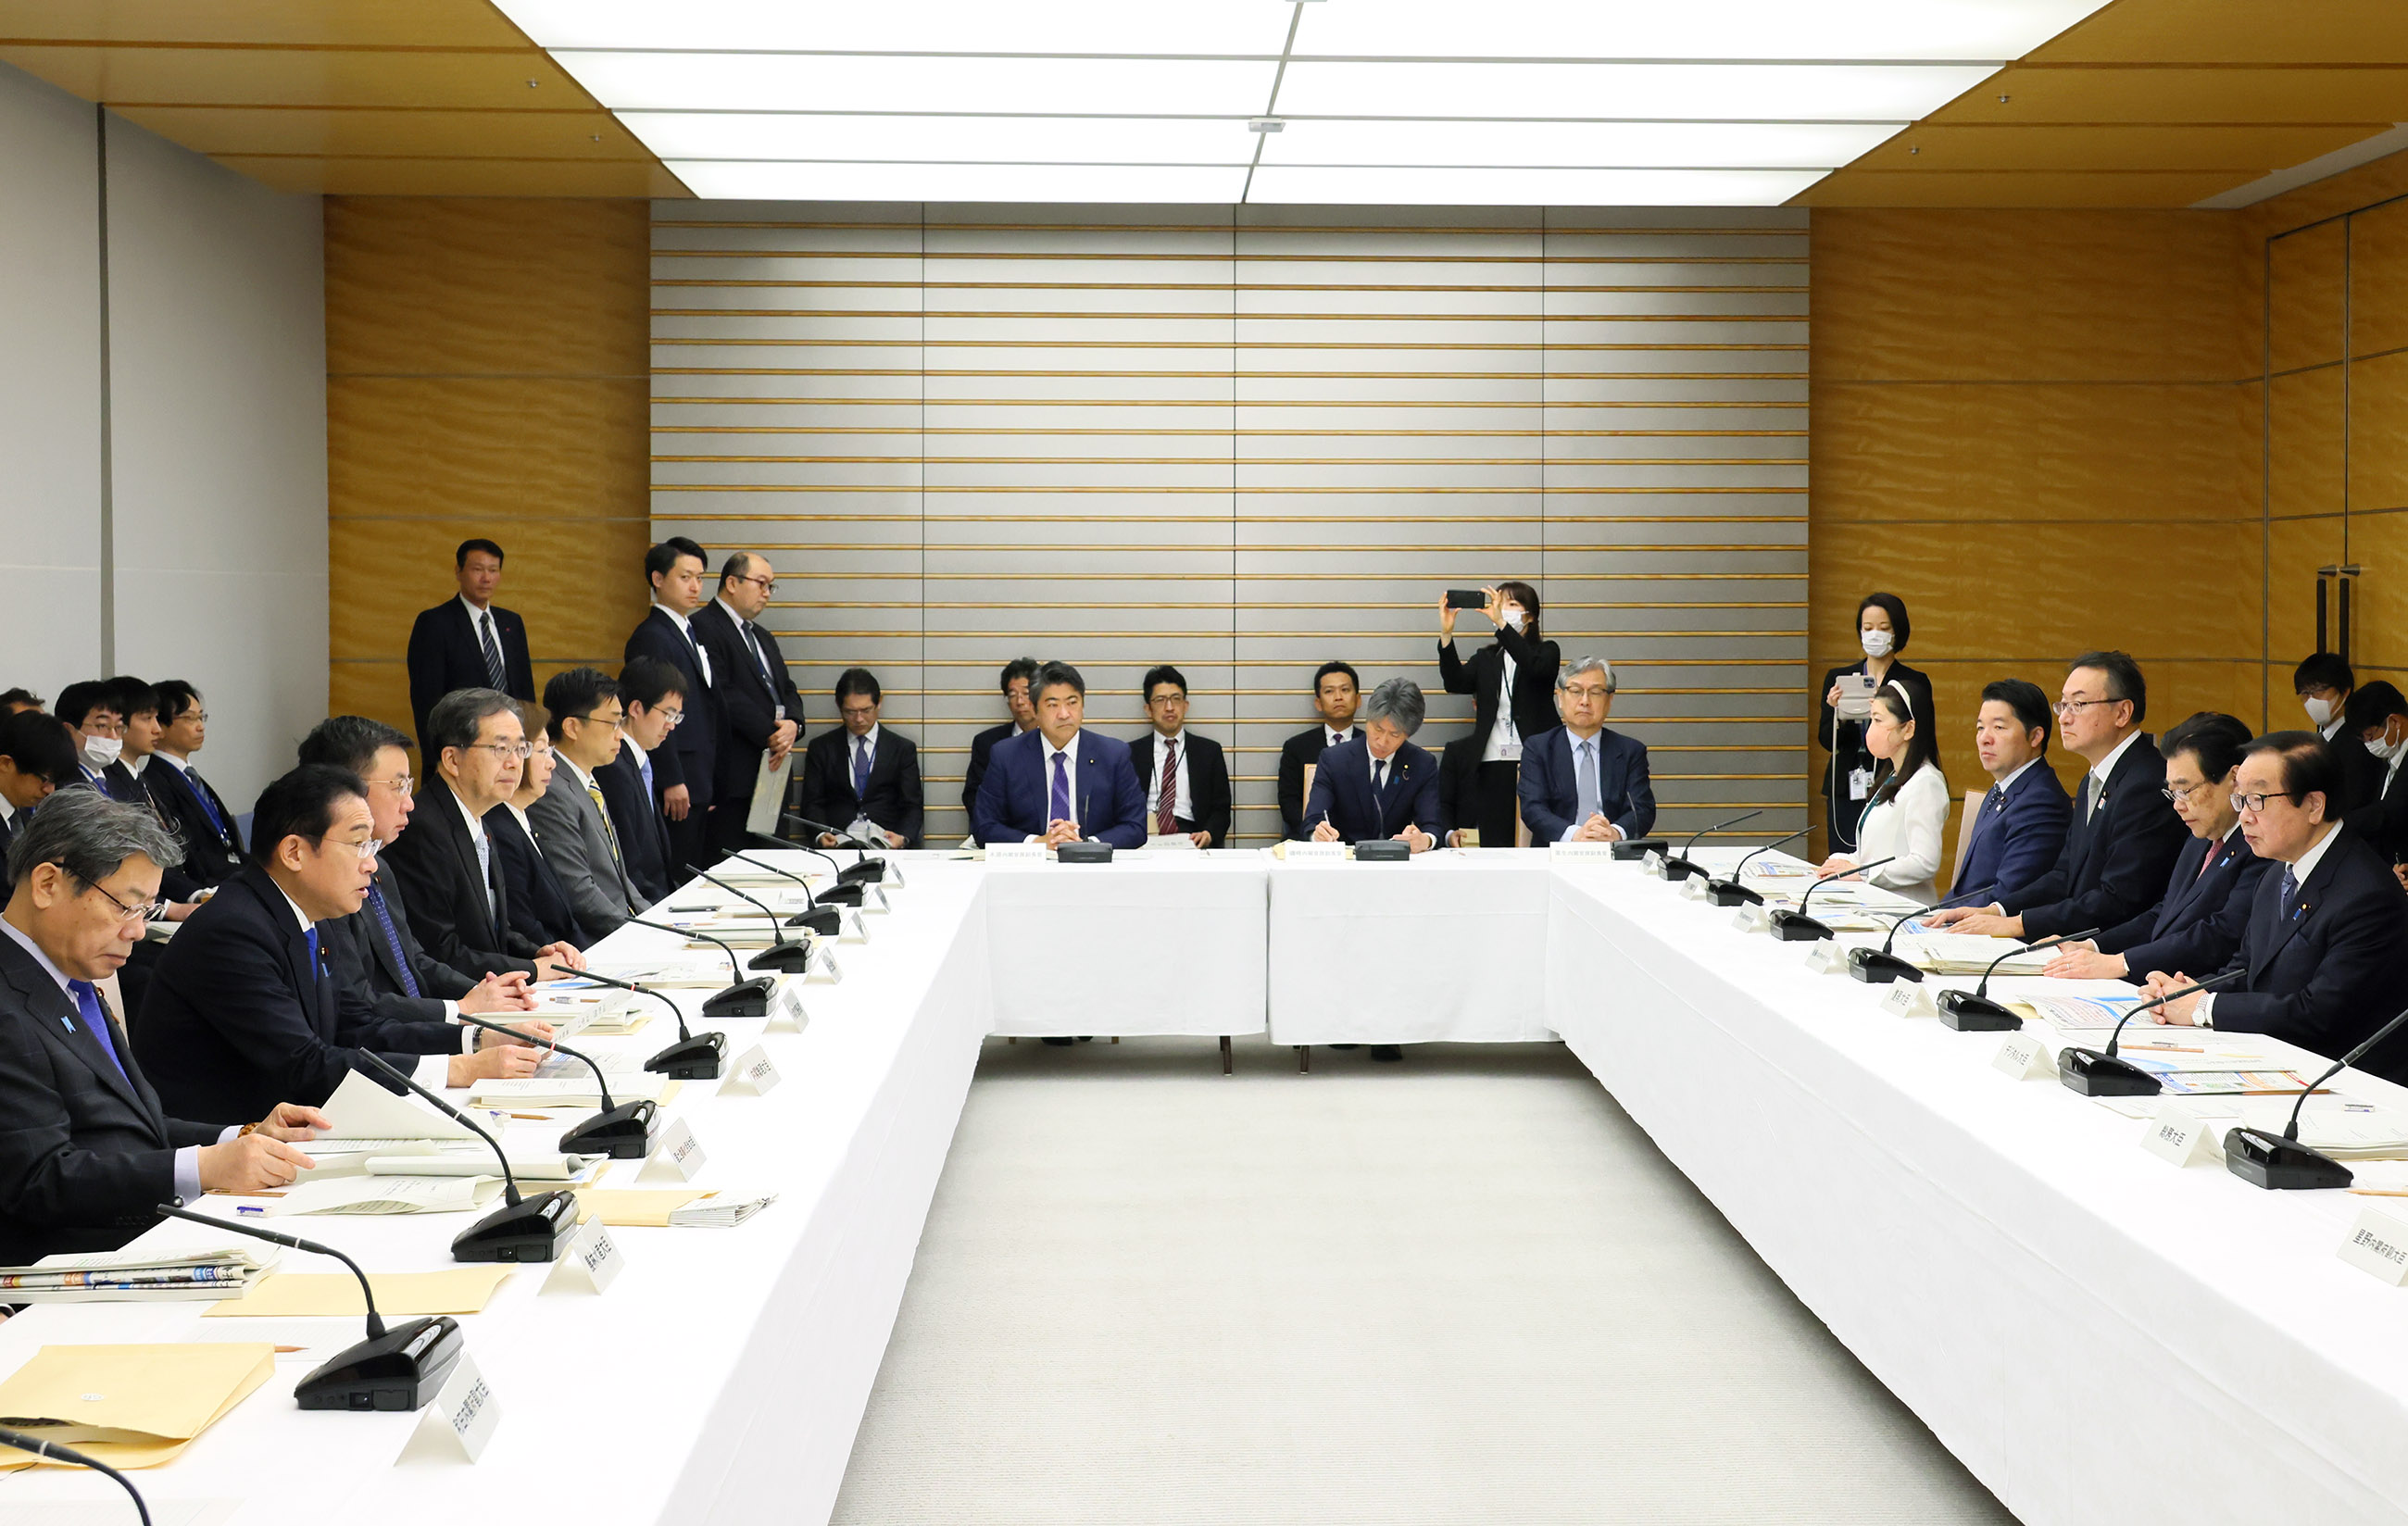 Prime Minister wrapping up a meeting (3)